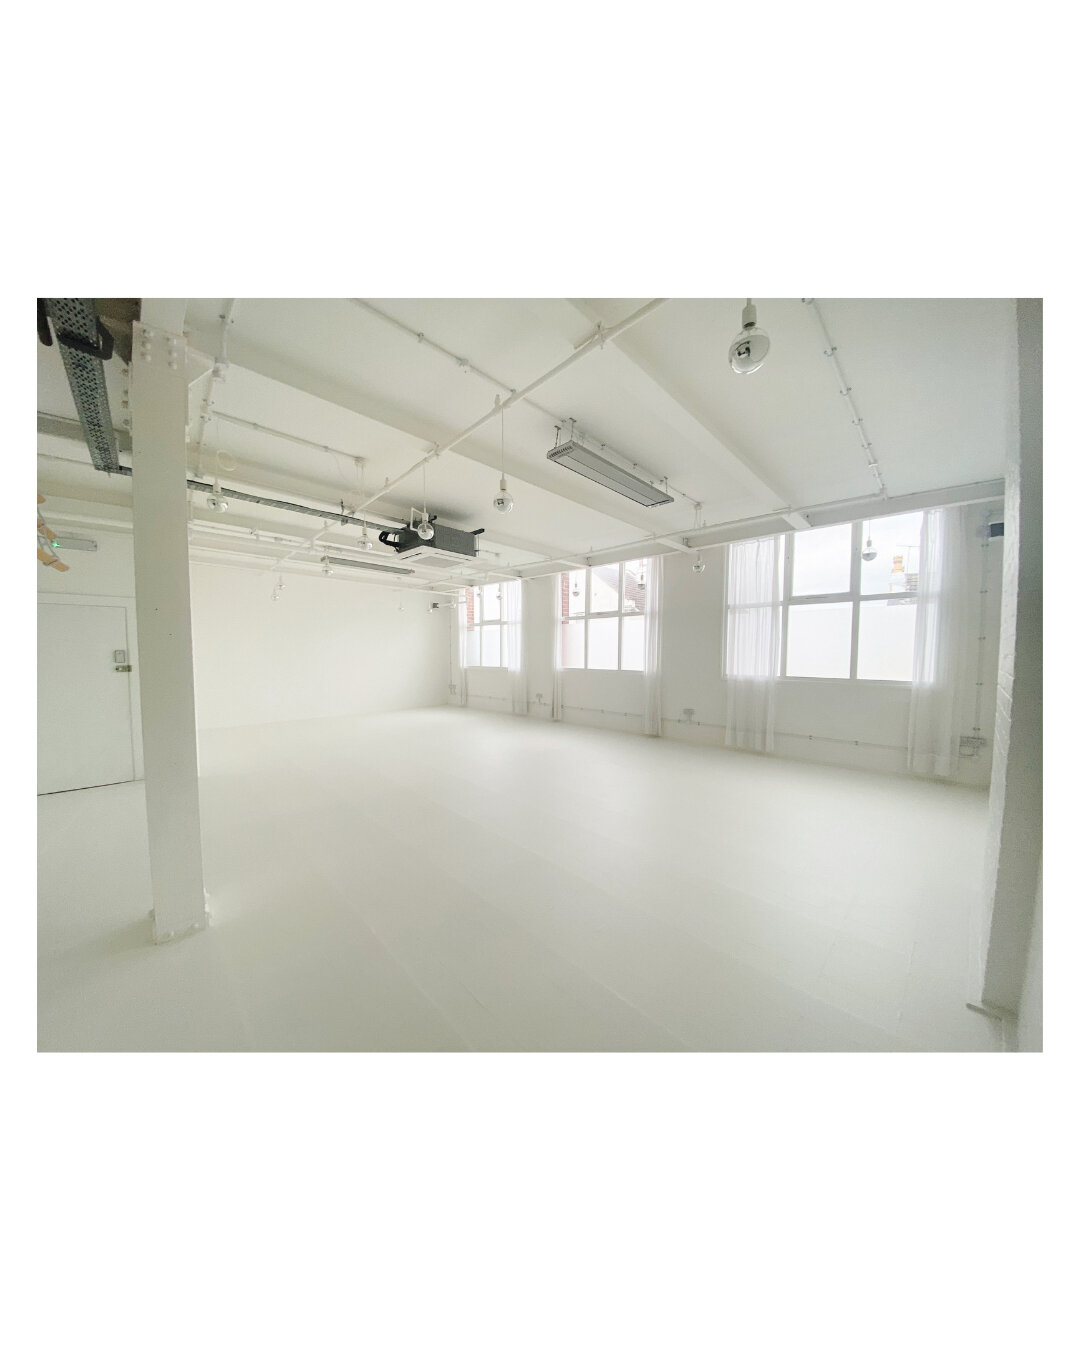 BEAUTIFUL BLANK CANVAS.​​​​​​​​
​​​​​​​​
Let your creativity shine at Now Studio.​​​​​​​​
​​​​​​​​
This is for all the photographers, artists, creators, independent business'...​​​​​​​​
​​​​​​​​
We rent out the studio when there isn't classes running